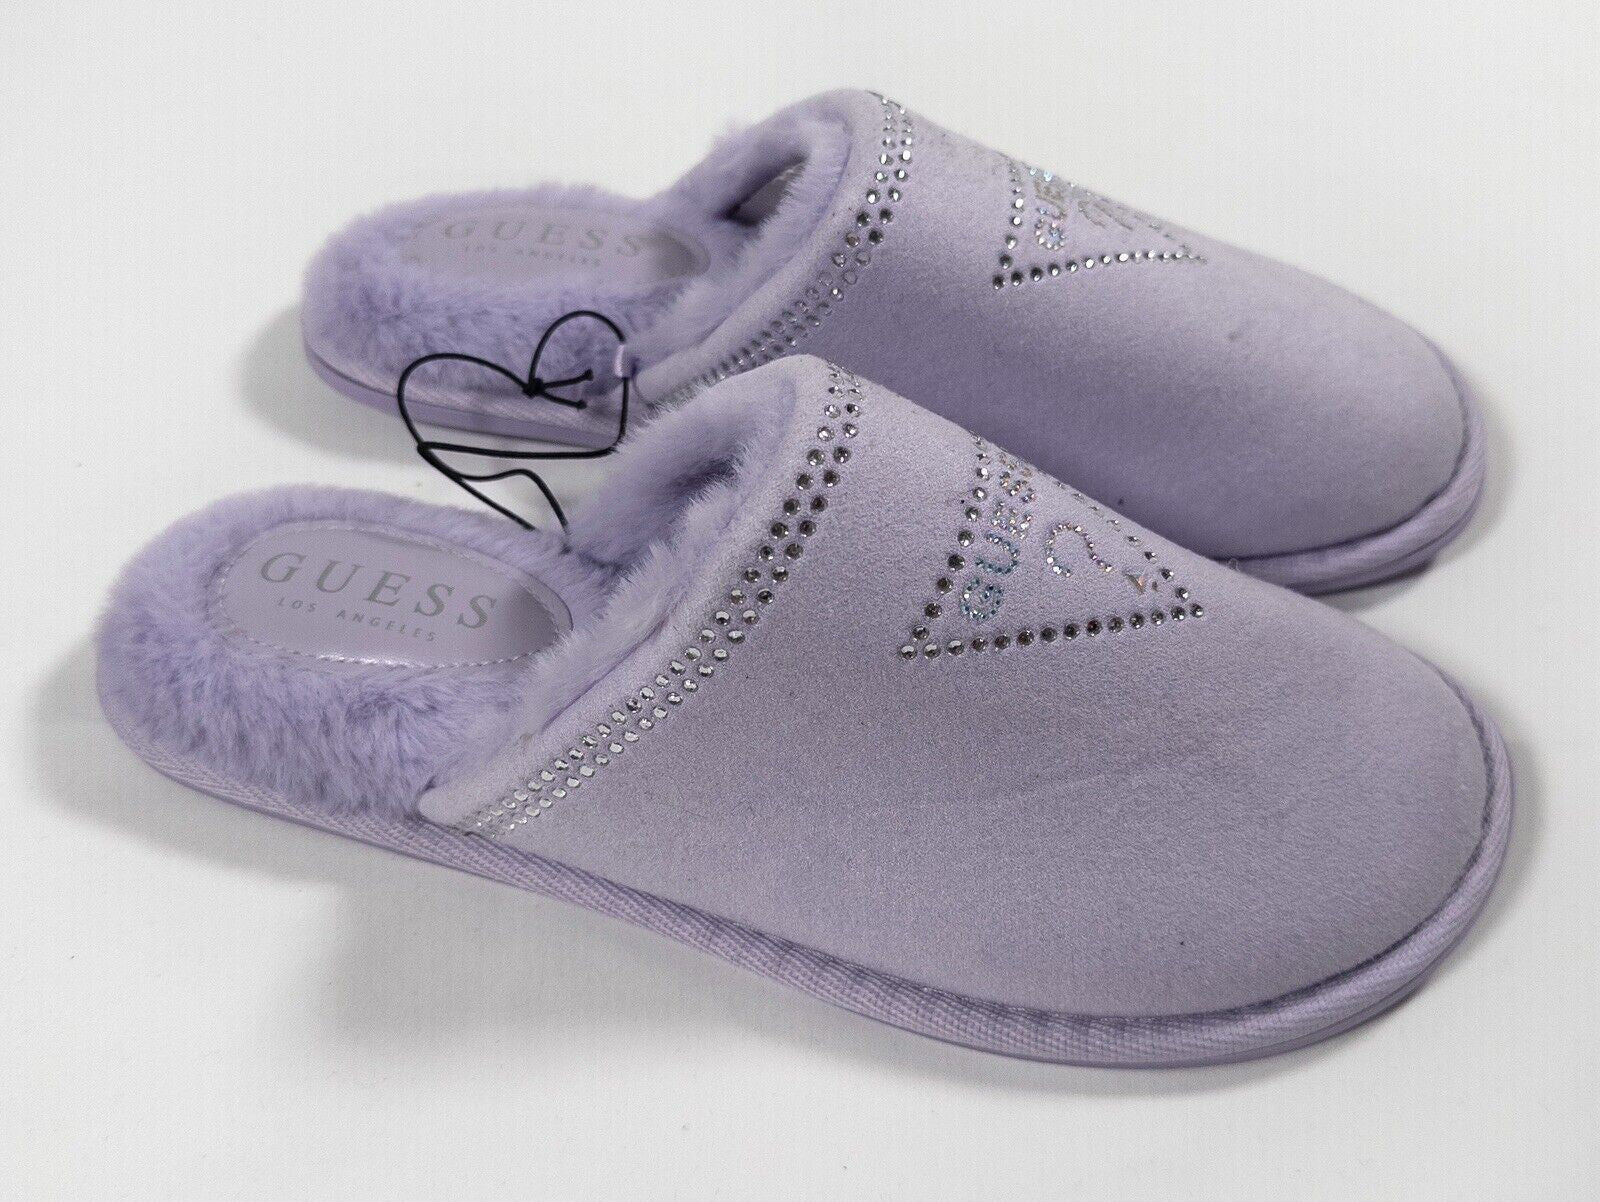 GUESS Women's Lilac Fluffy Slip On Slippers Size UK 6